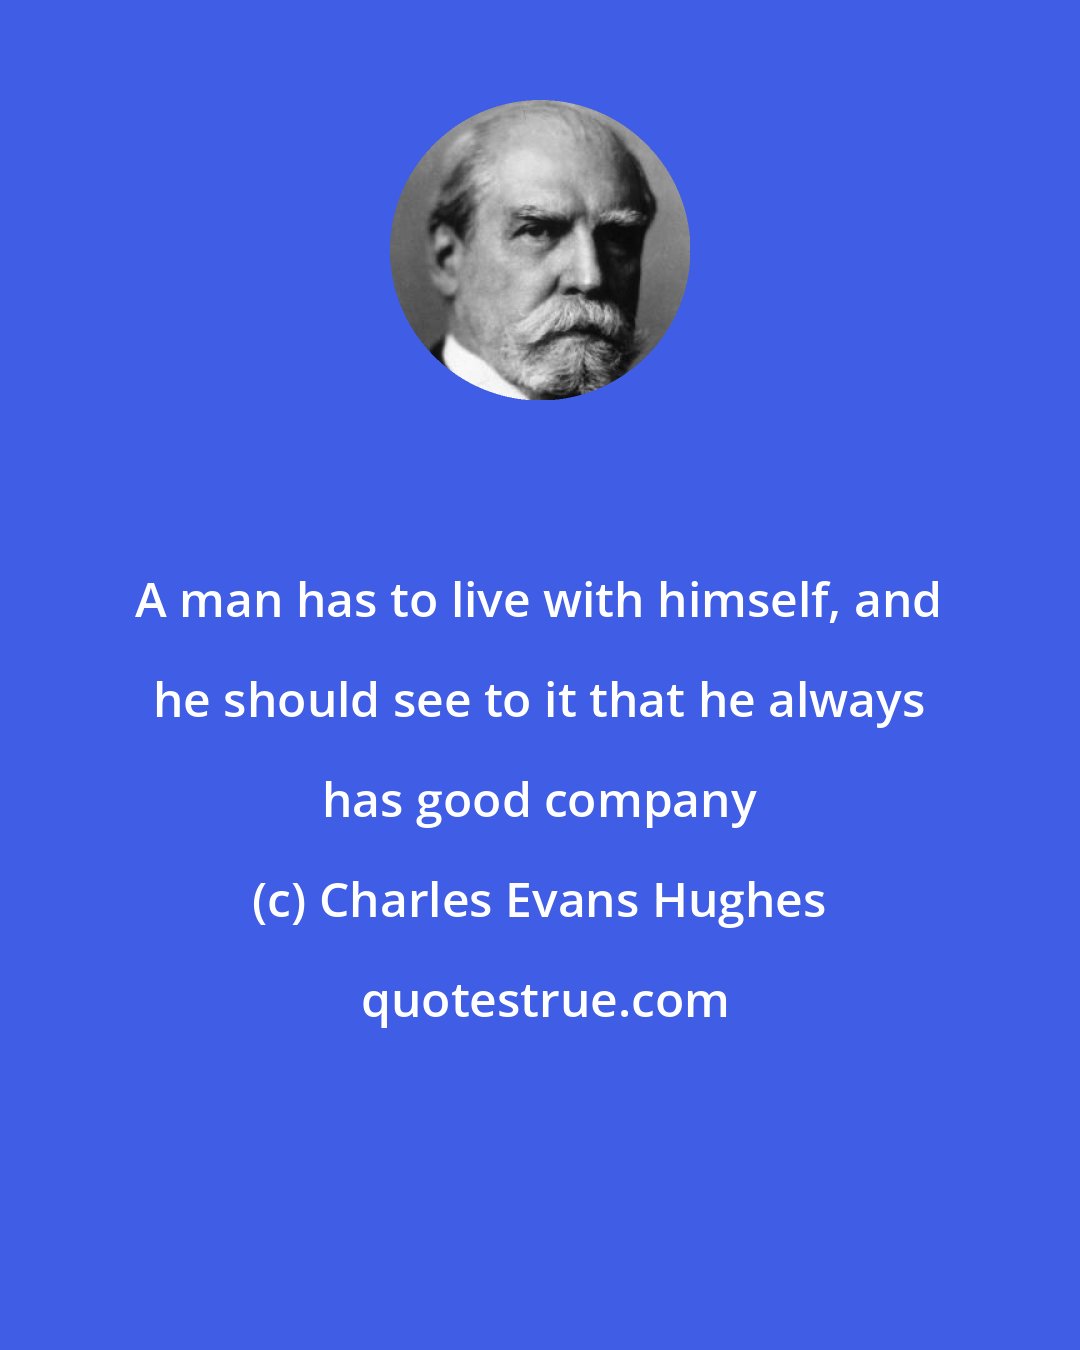 Charles Evans Hughes: A man has to live with himself, and he should see to it that he always has good company